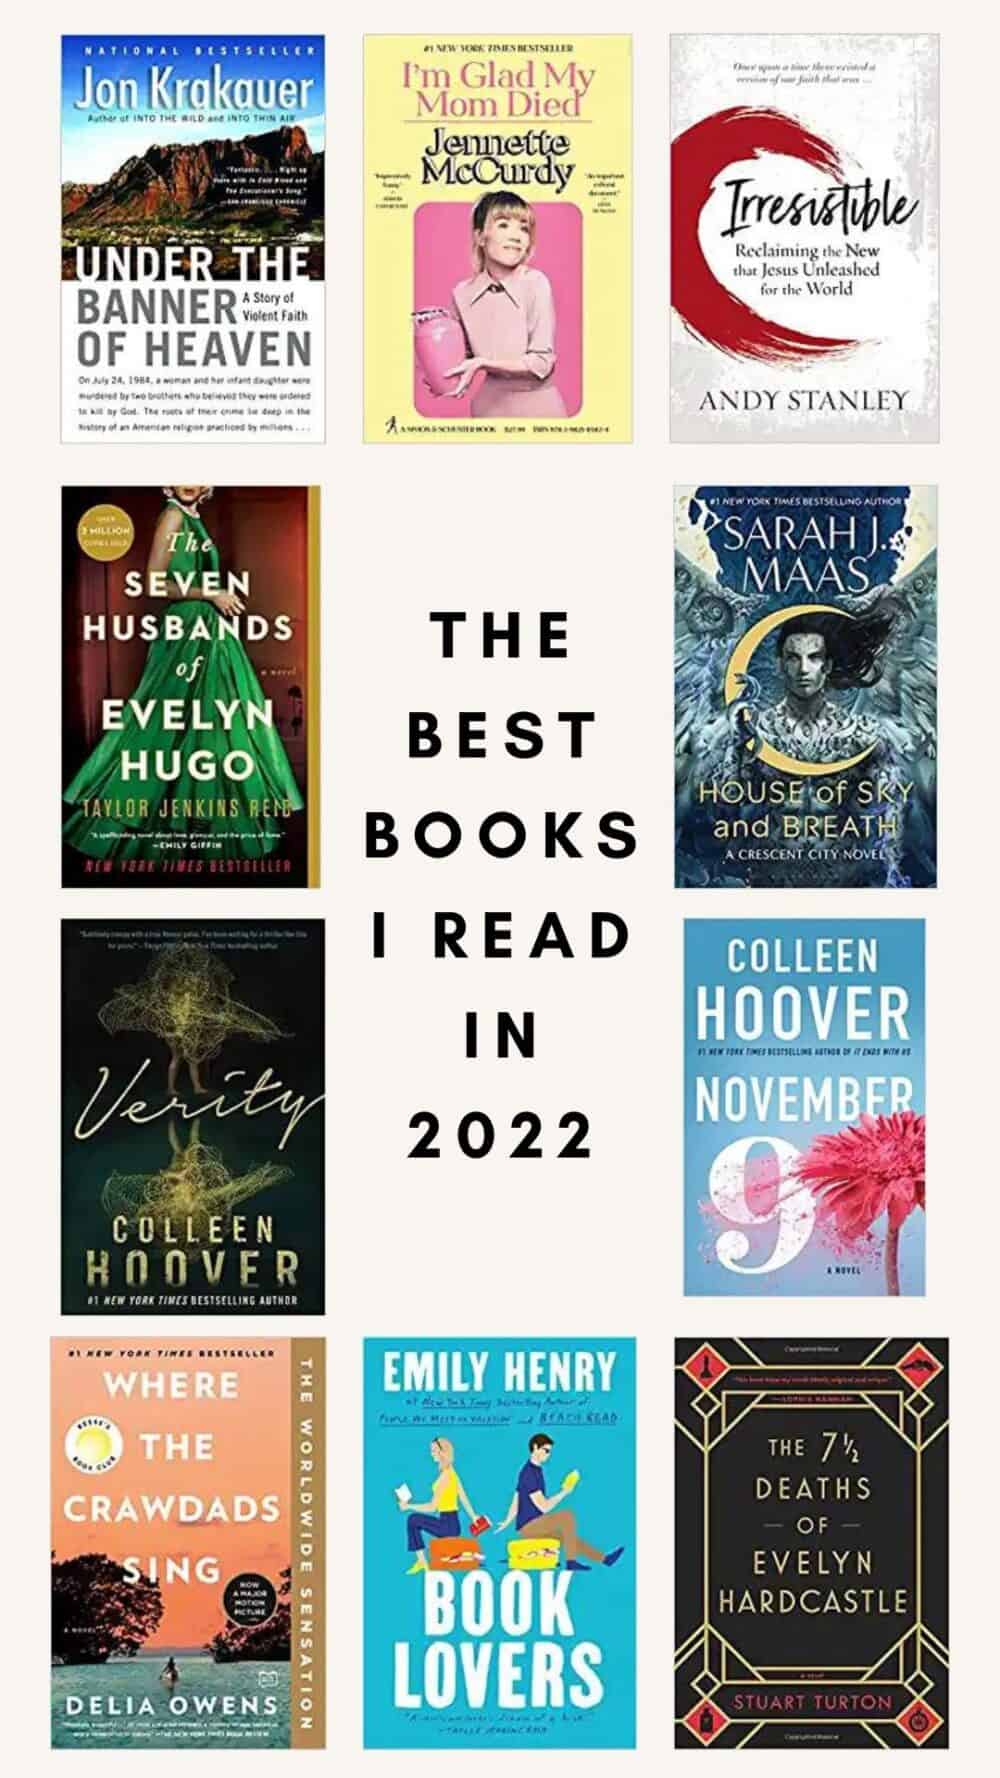 A collage of the 10 best books I read in 2022 